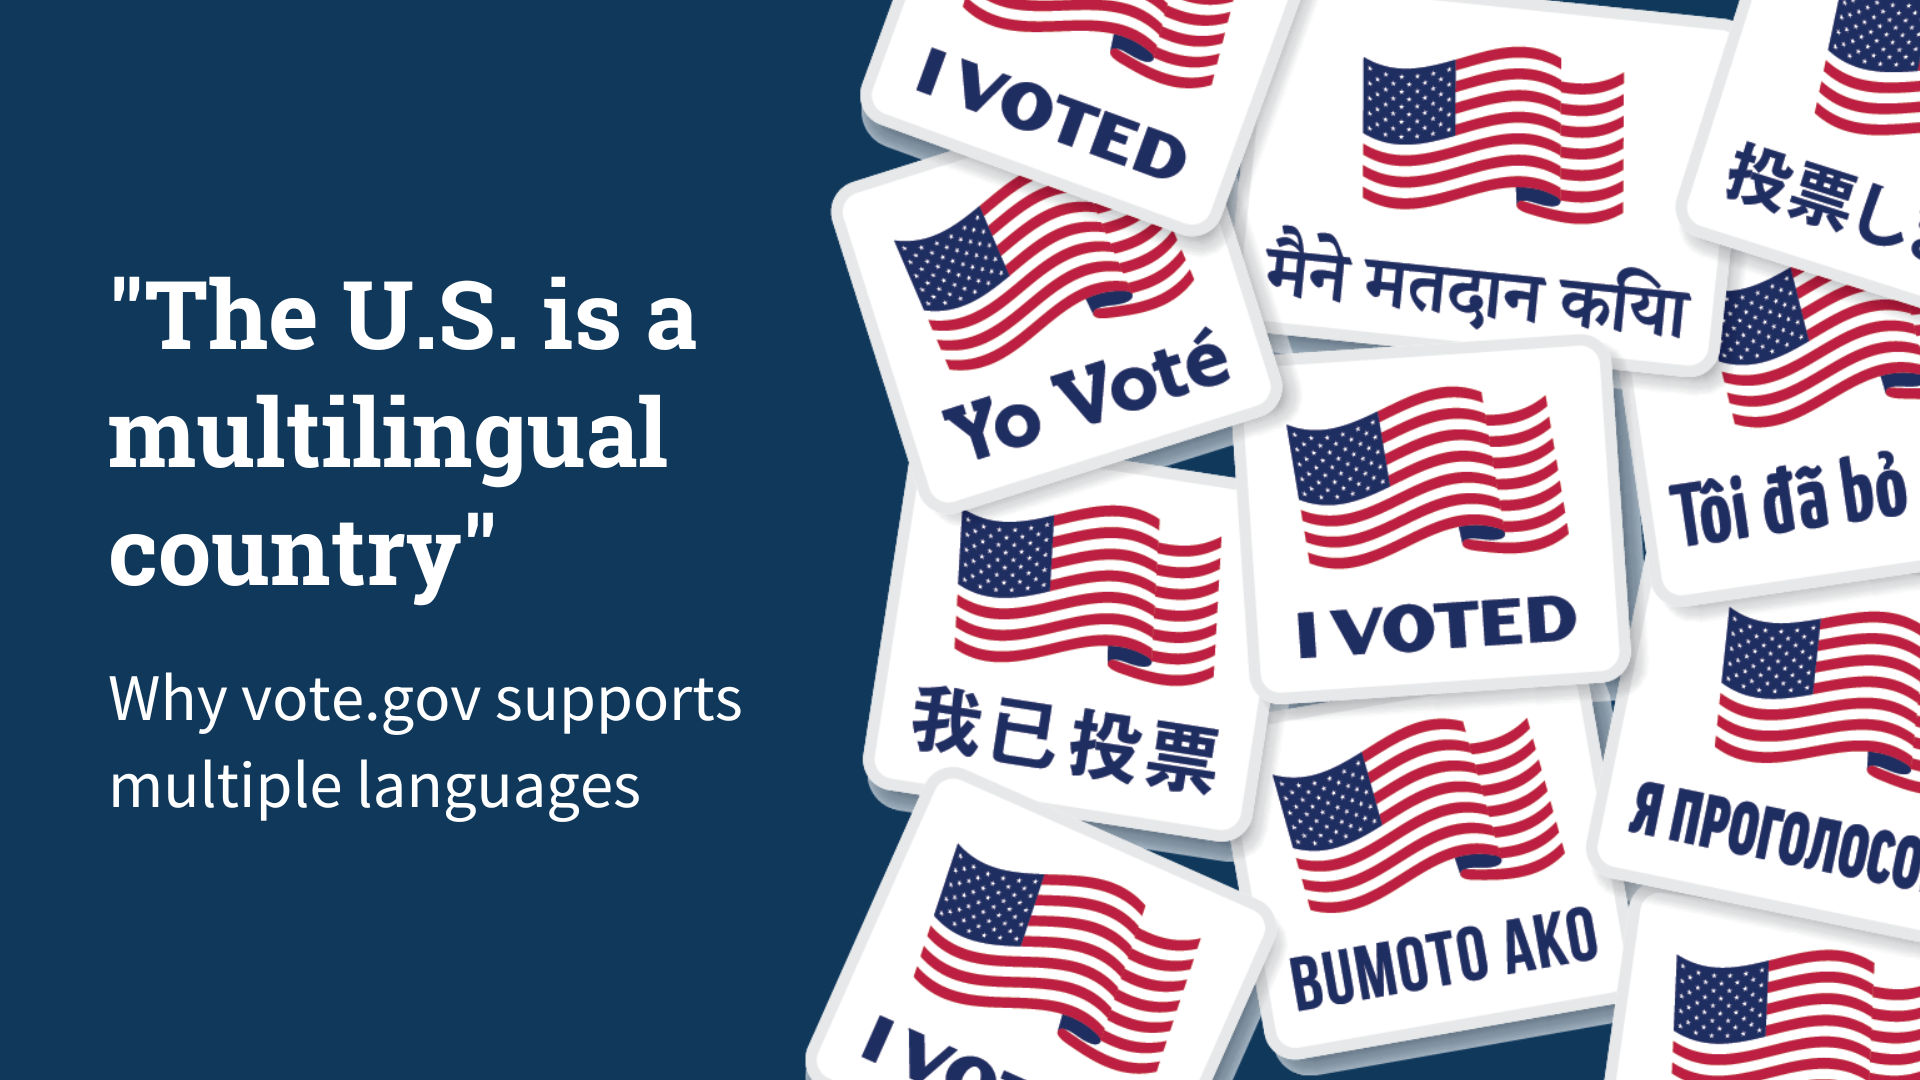 "The U.S. is a multilingual country" Why vote.gov supports multiple languages with illustration of "I voted" stickers in multiple languages. 